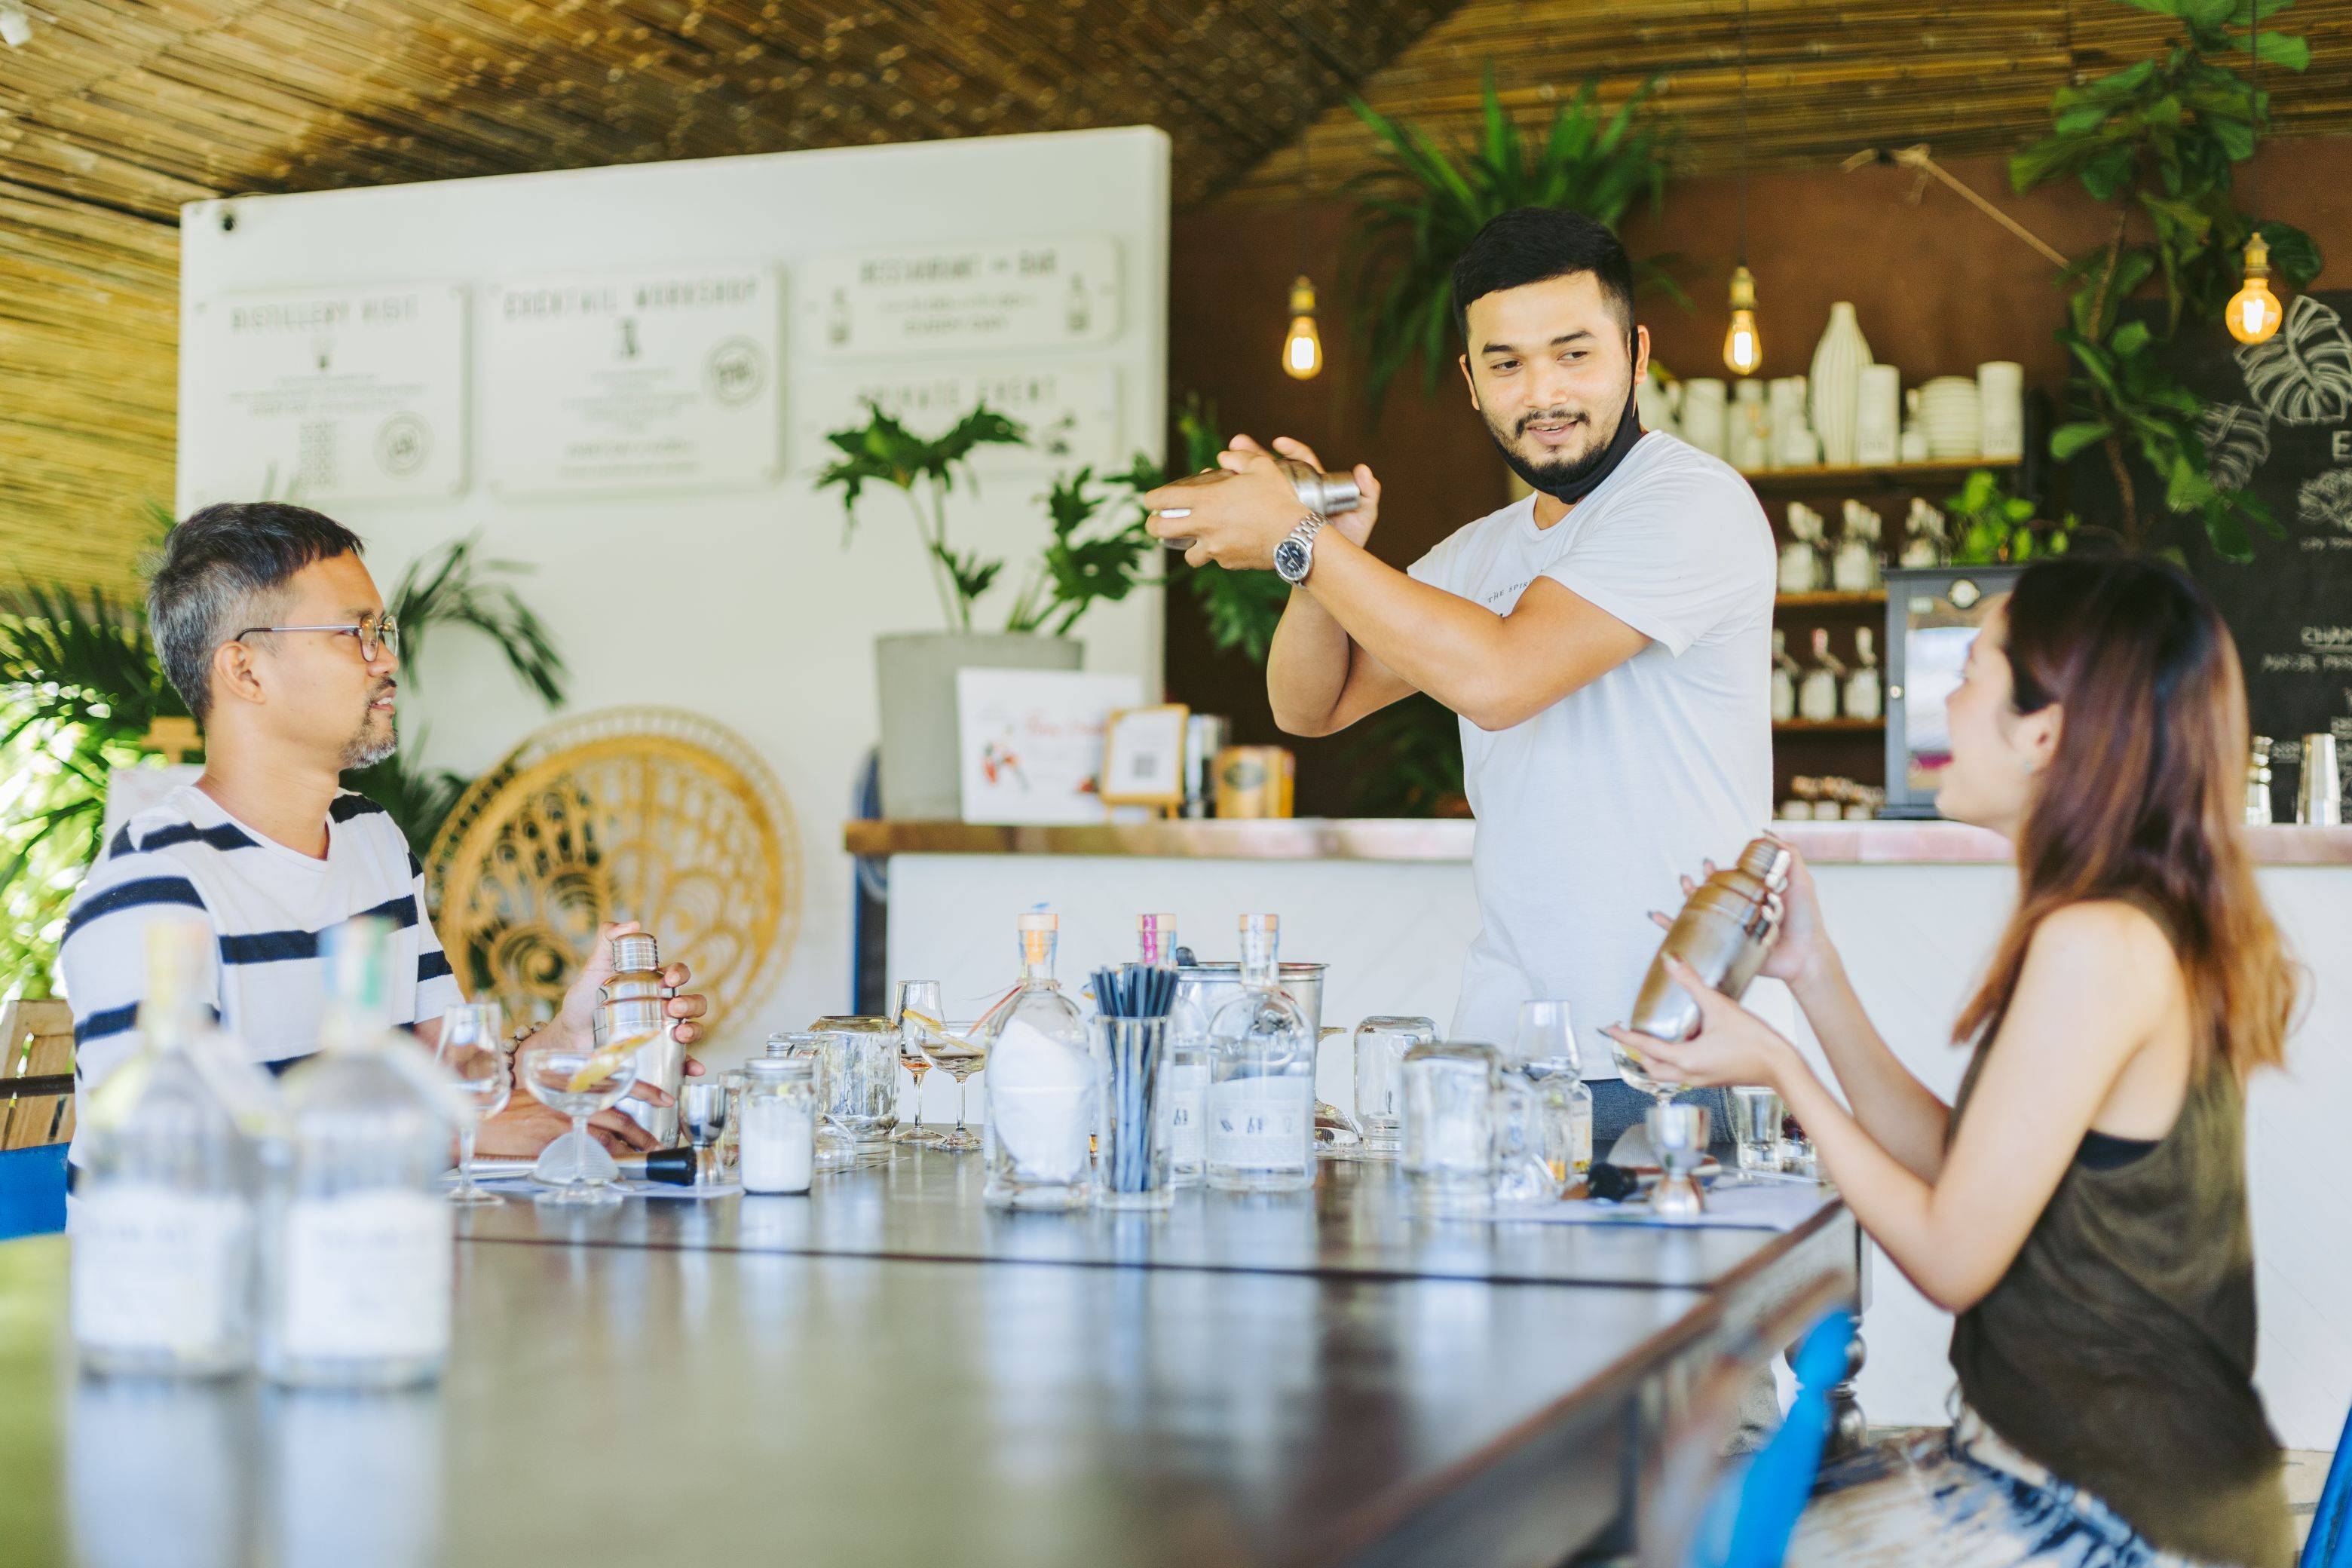 Chalong Bay Rum Cocktail Workshop in Phuket from EUR 16.08 | Pelago